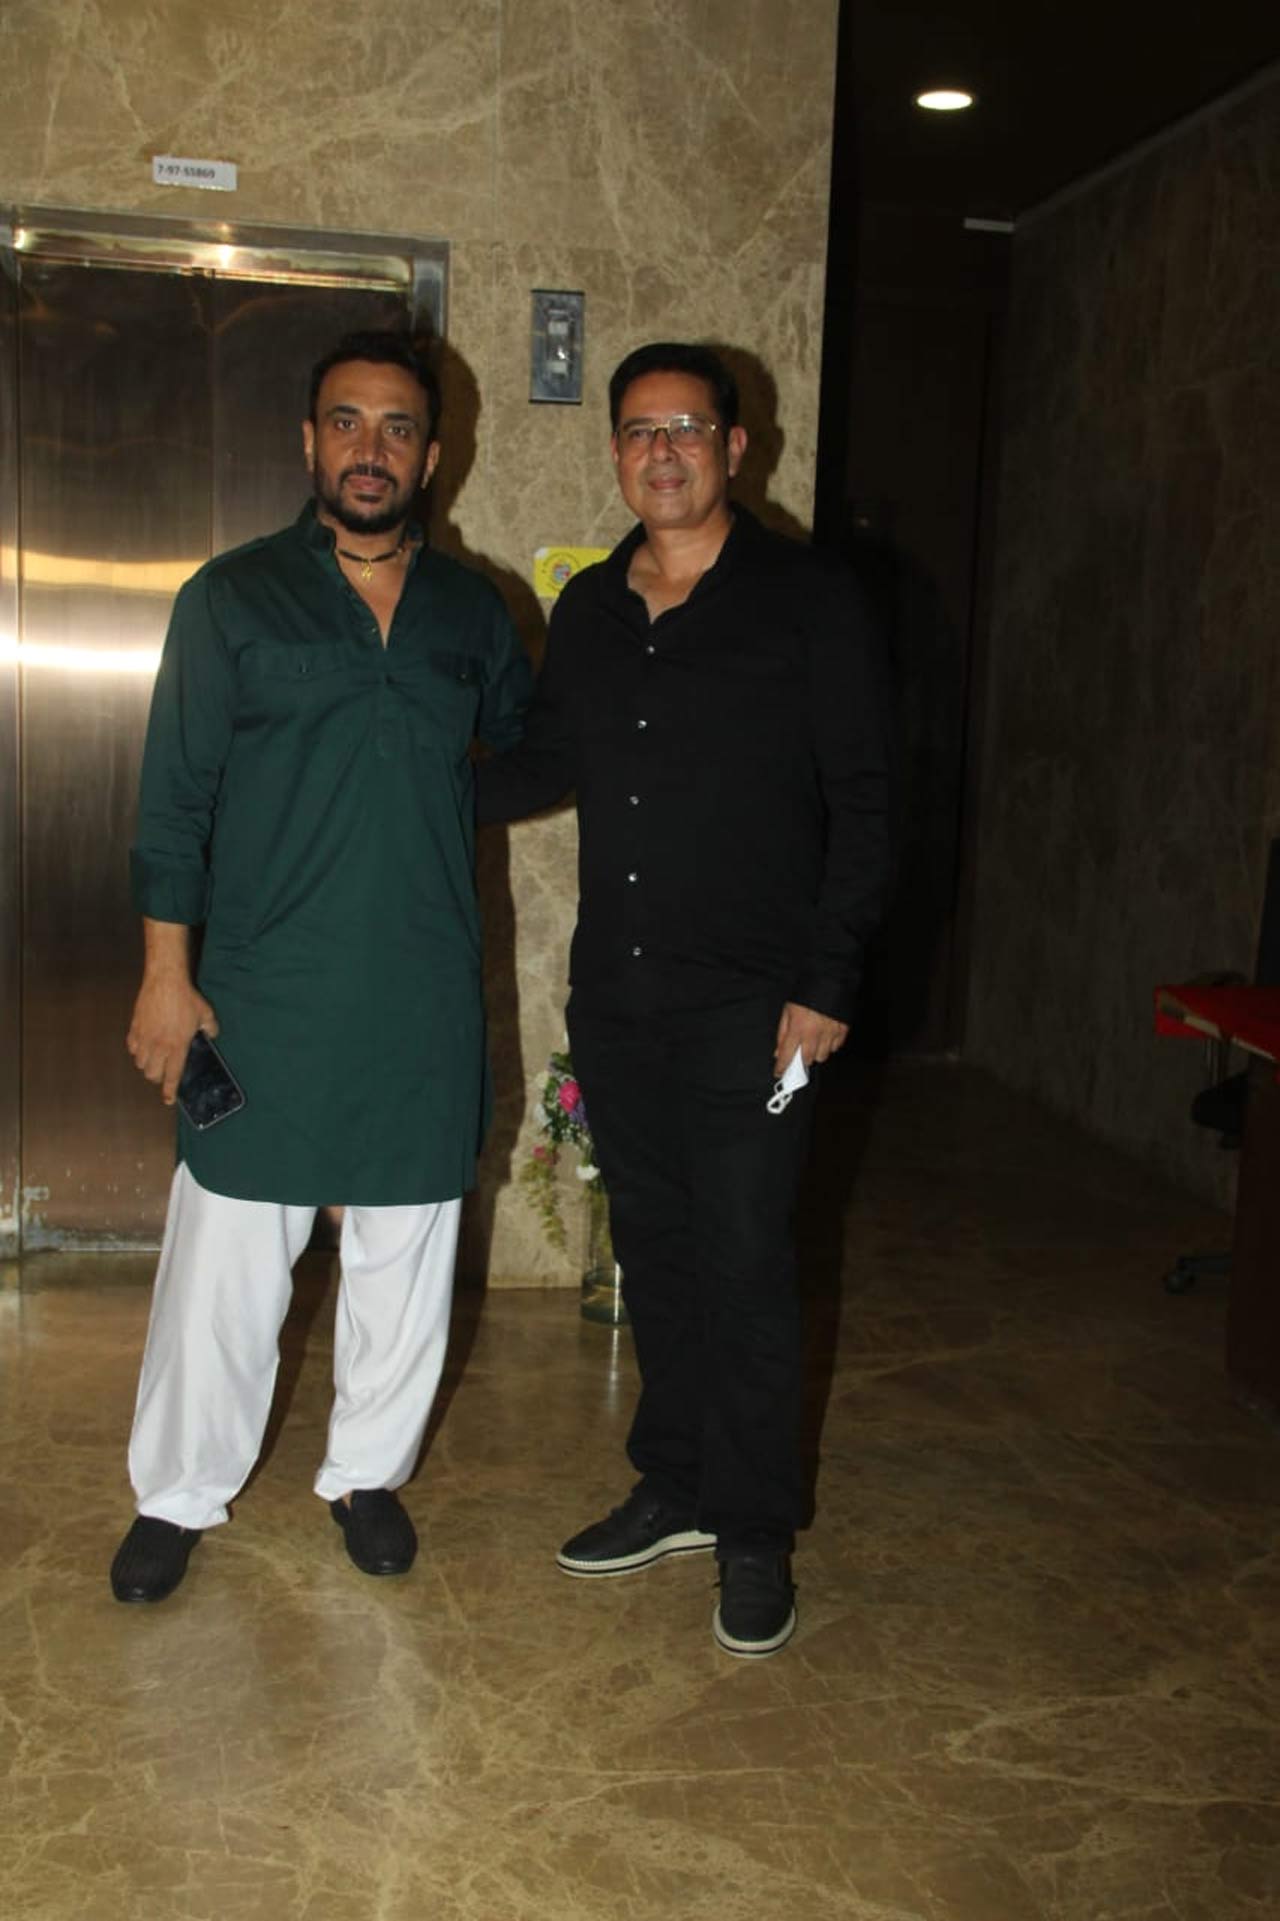 Salman Khan's brother-in-law Atul Agnihotri posed with their bodyguard Shera as they attended Ramesh Taurani's Diwali party hosted at the producer's residence.